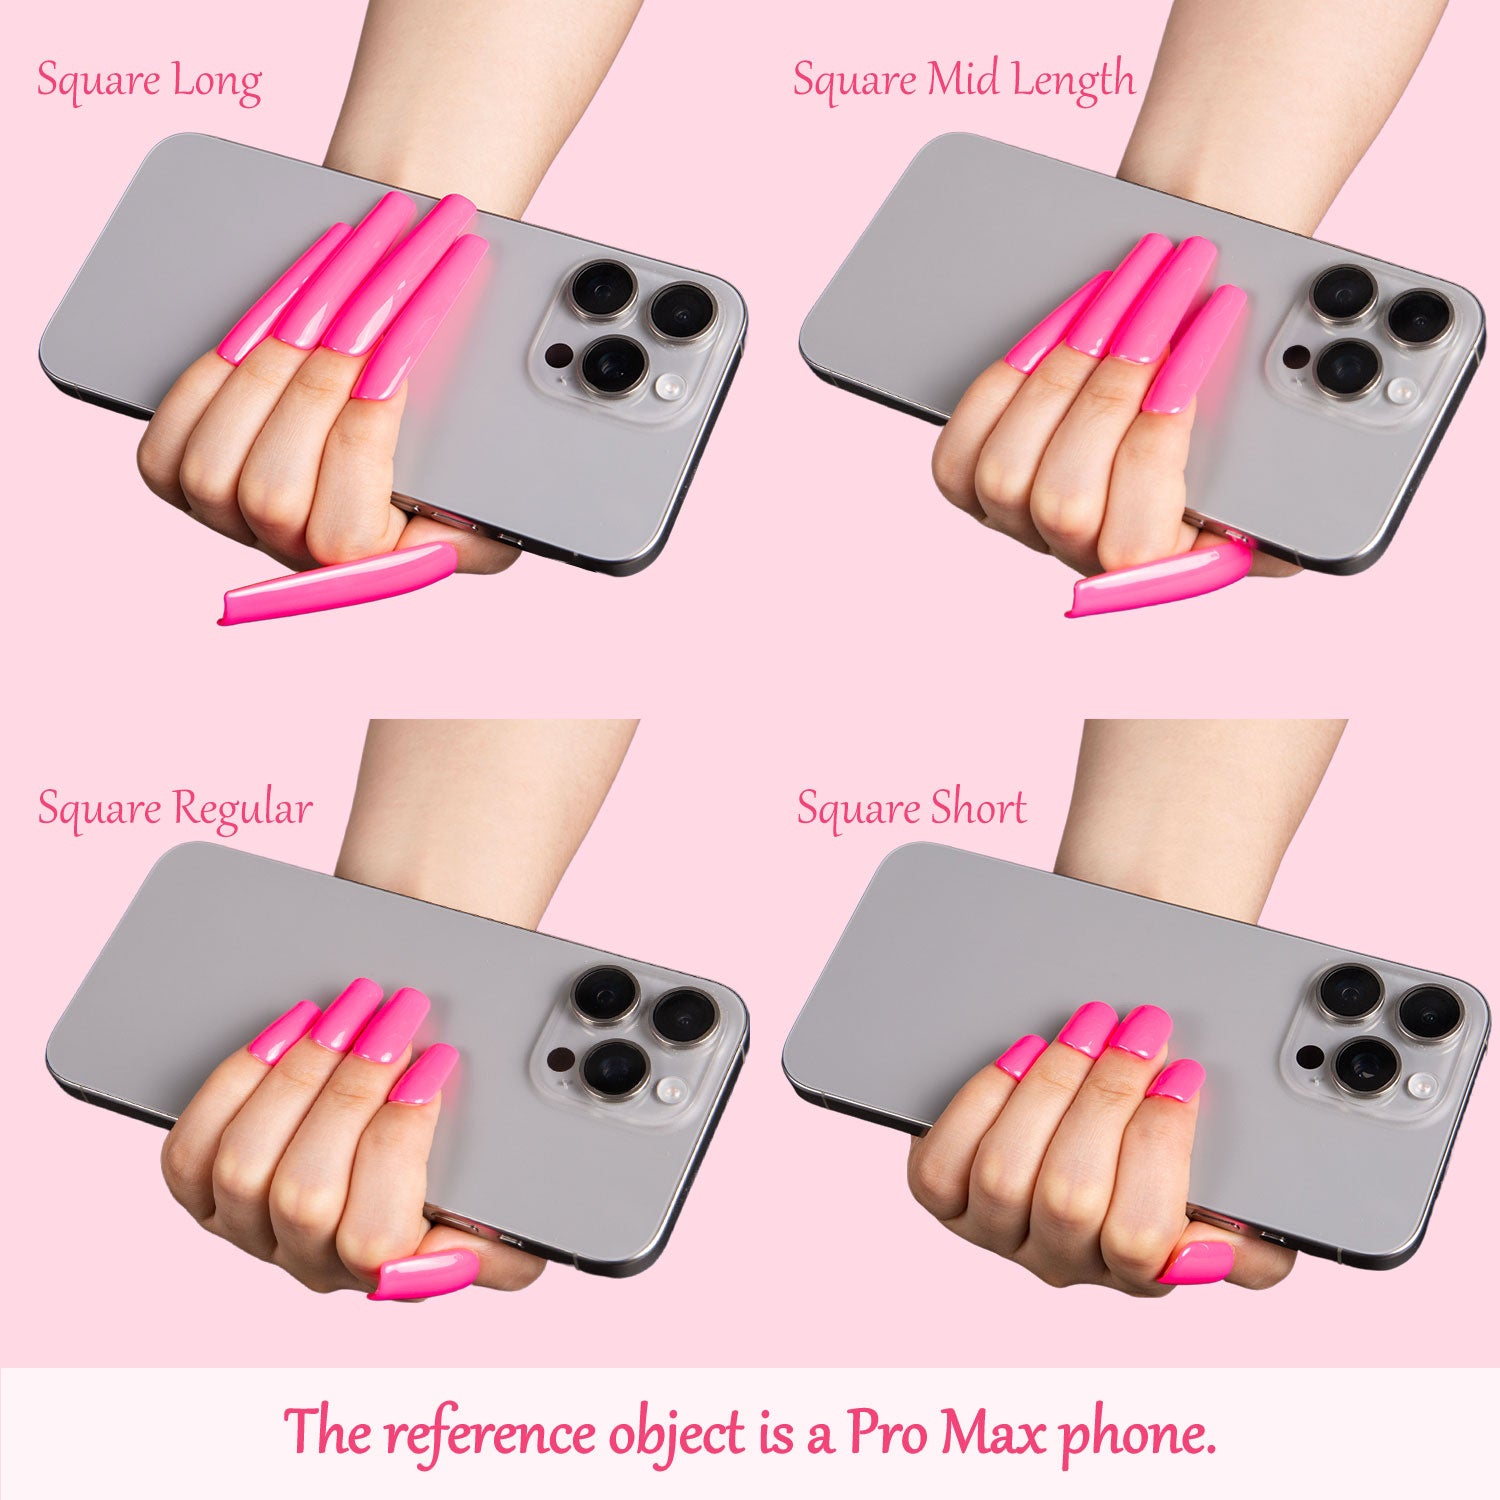 Comparison of four lengths of pink square-shaped press-on nails, labeled as Square Long, Square Mid Length, Square Regular, and Square Short, using a Pro Max phone as reference